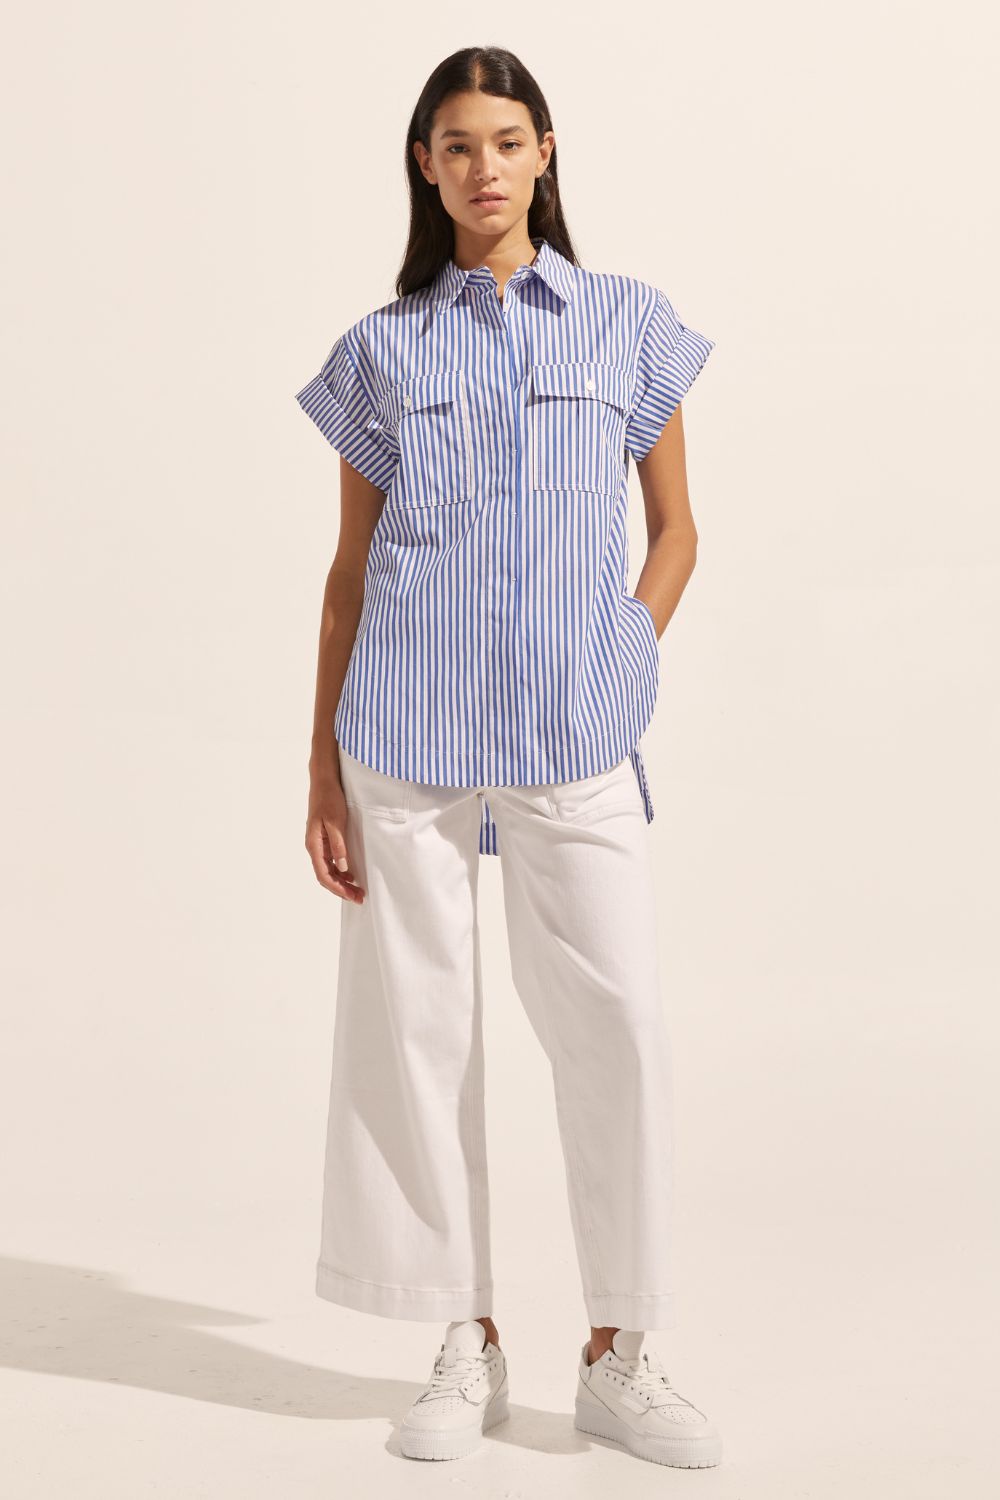 blue and white stripe, cuffed short sleeve, high-low hemline, covered placket, oversized patch pockets, shirt, top, front image